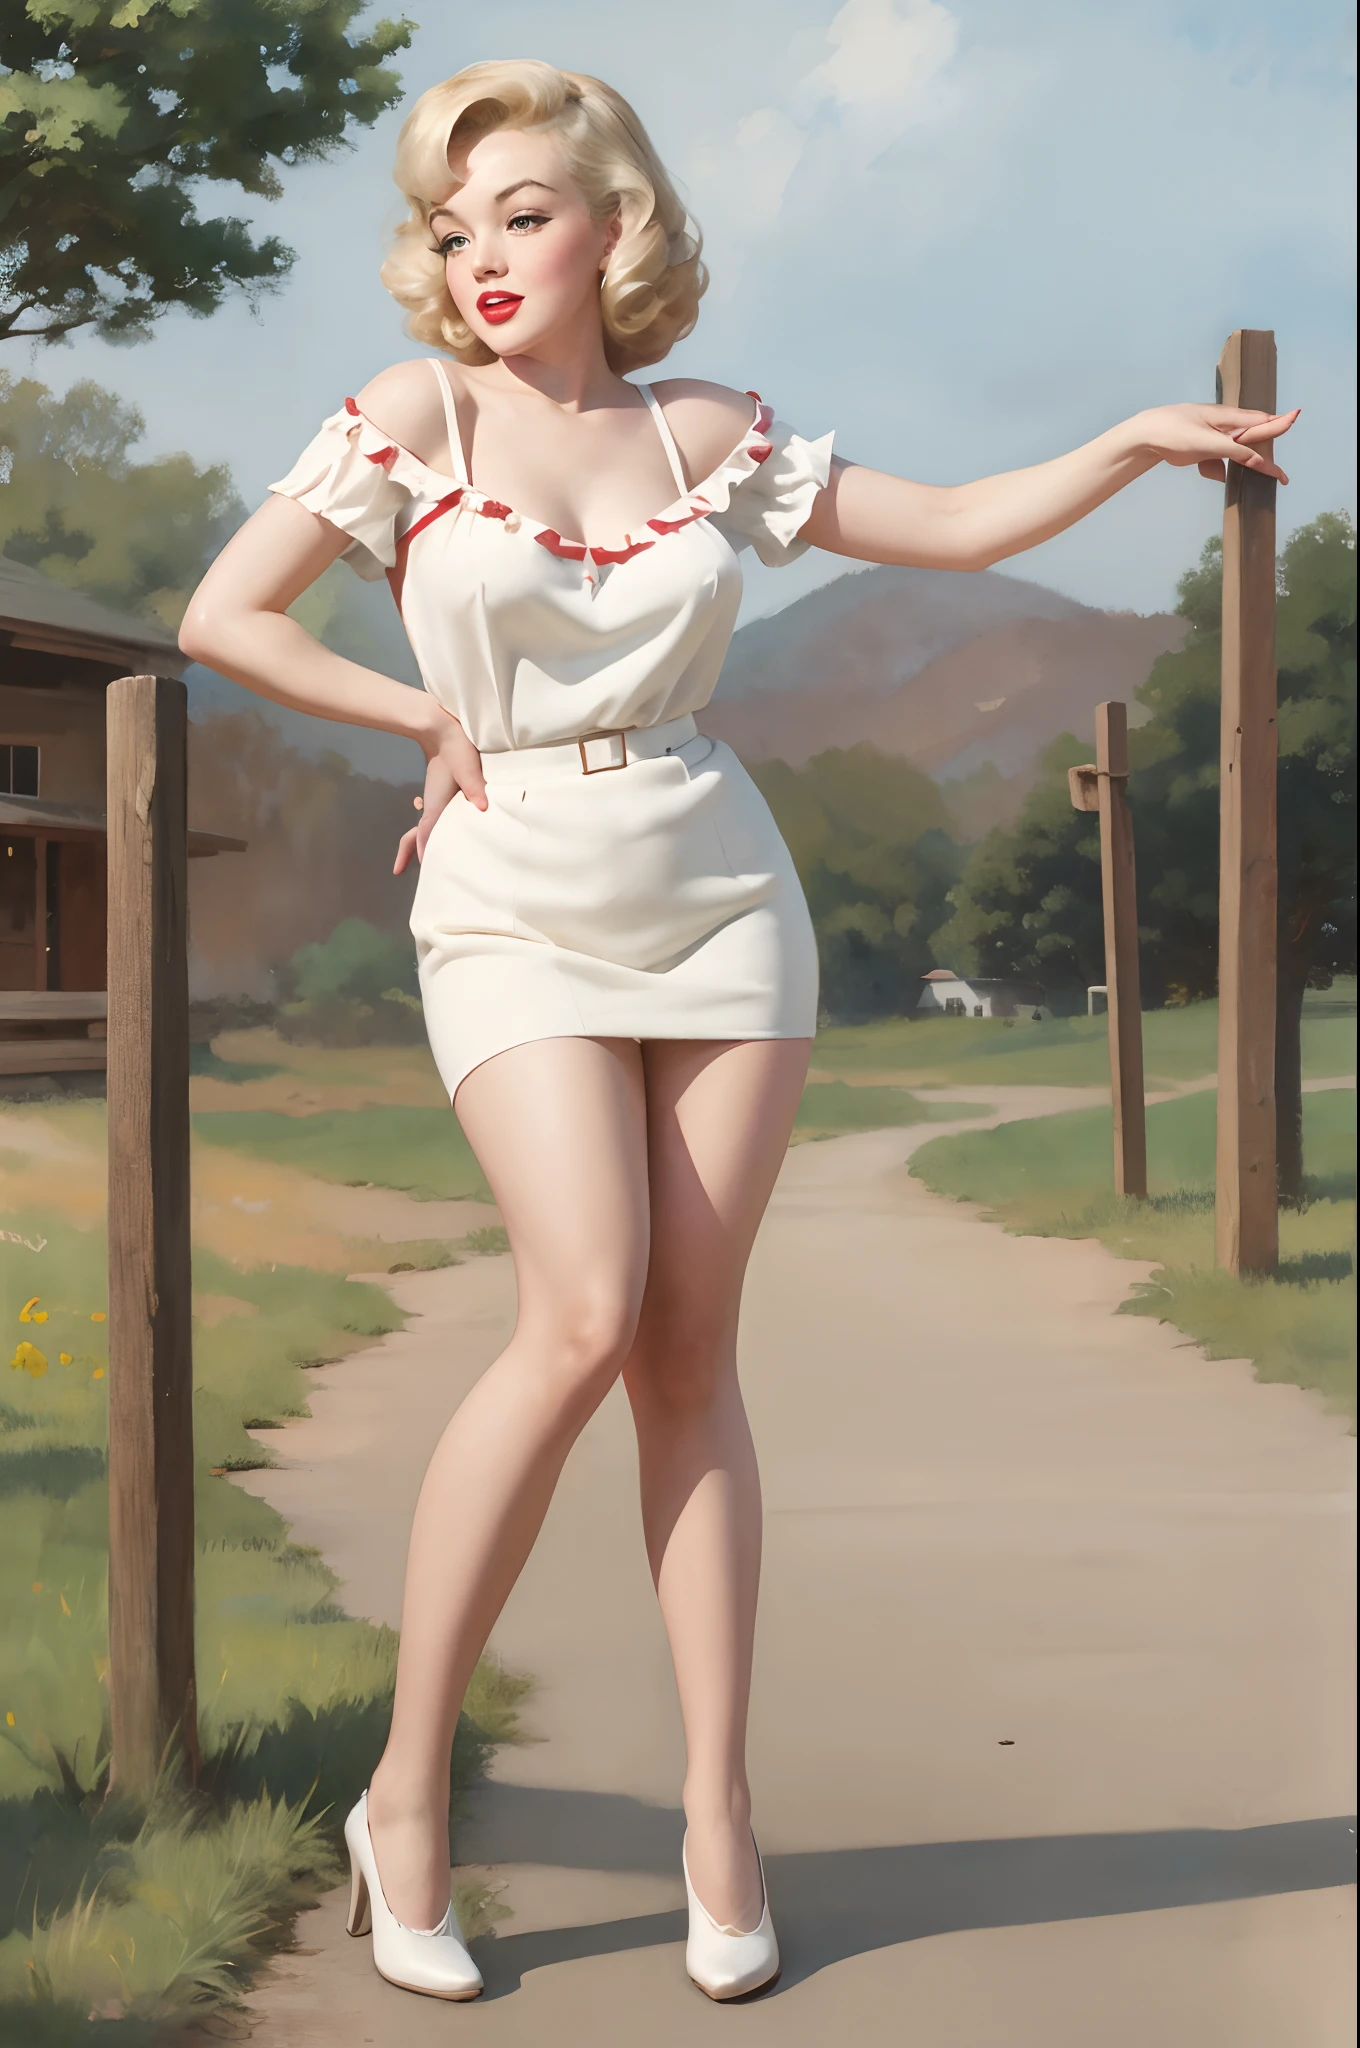 1970s Watercolor, Pen and Ink, a 25 years old Marilyn Monroe in retro fashion, pin-up style, full body, depiction of rural life, light gray and light brown and red and white and blue, in the style of classical Americana, mottled, playful innocence, white dotted, cutout from white background, in the style of Norman Rockwell, masterpiece art work.